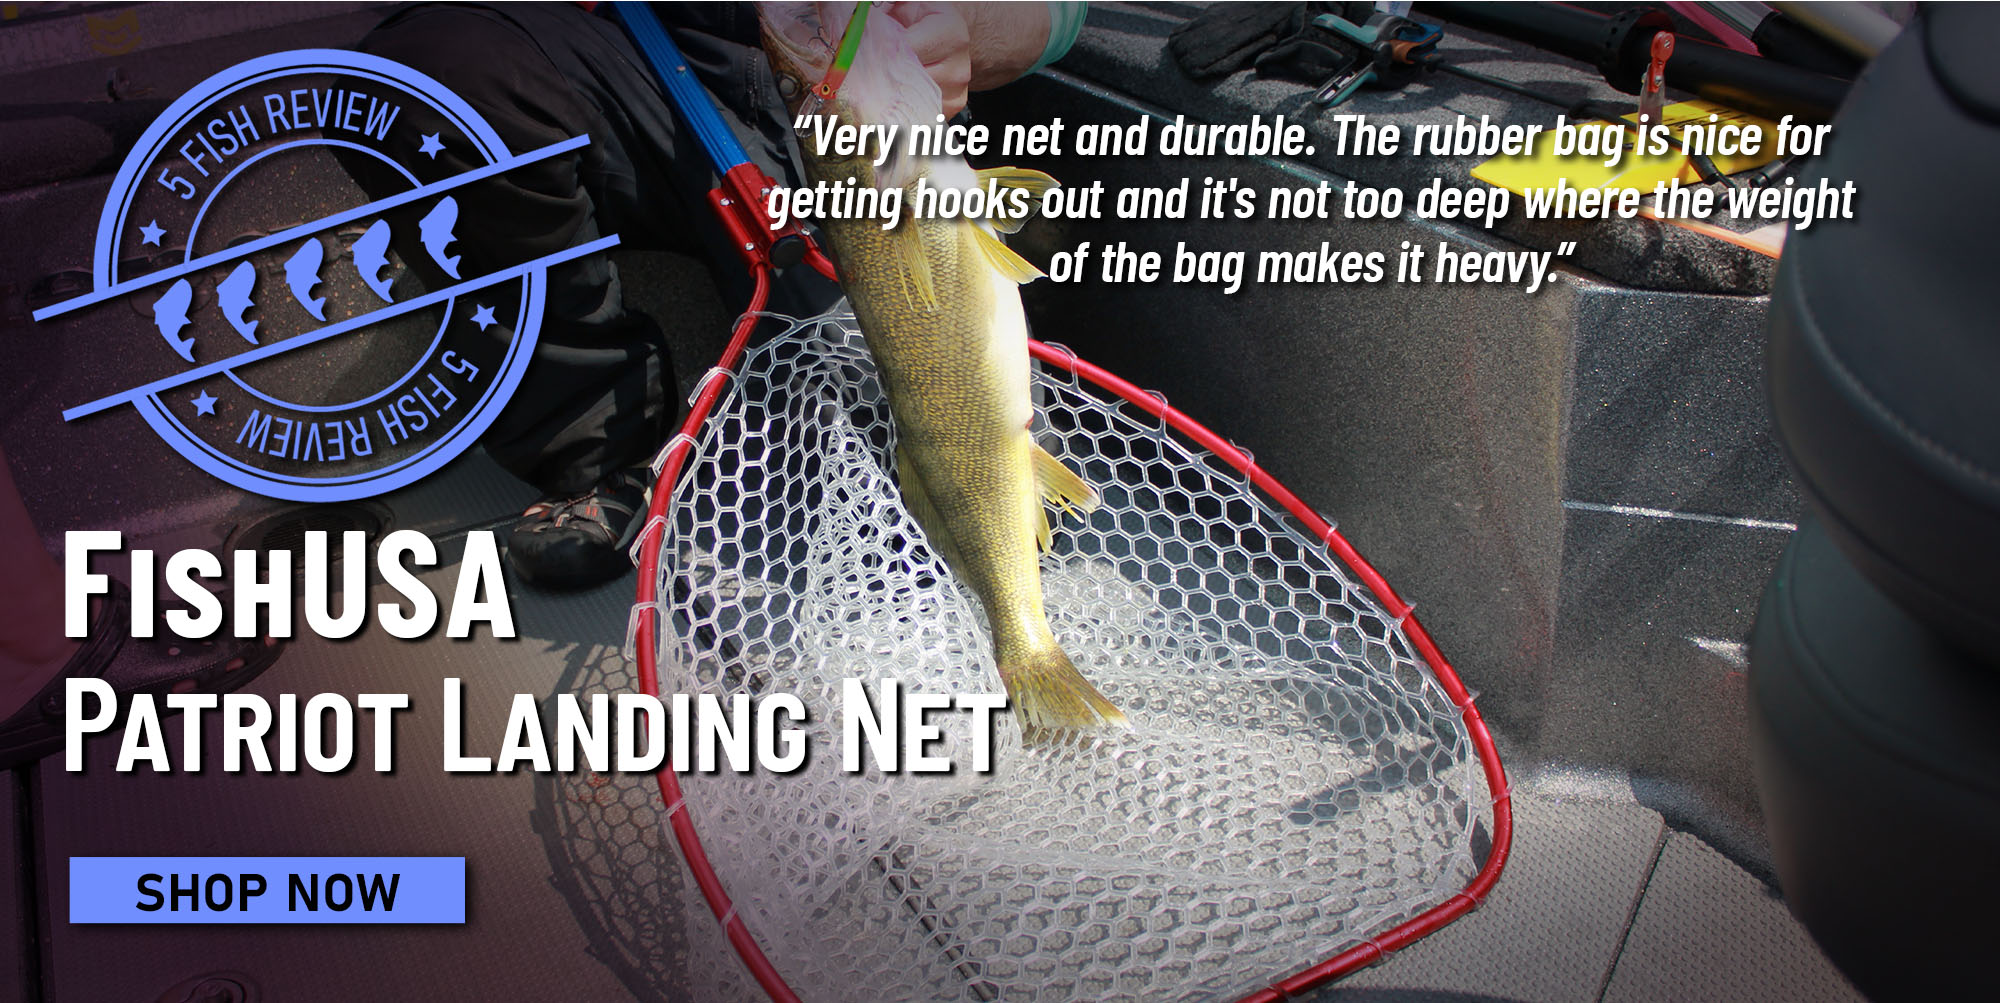 5 Fish Review! FishUSA Patriot Landing Net Very nice net and durable. The rubber bag is nice for getting hooks out and it's not too deep where the weight of the bag makes it heavy. Shop Now